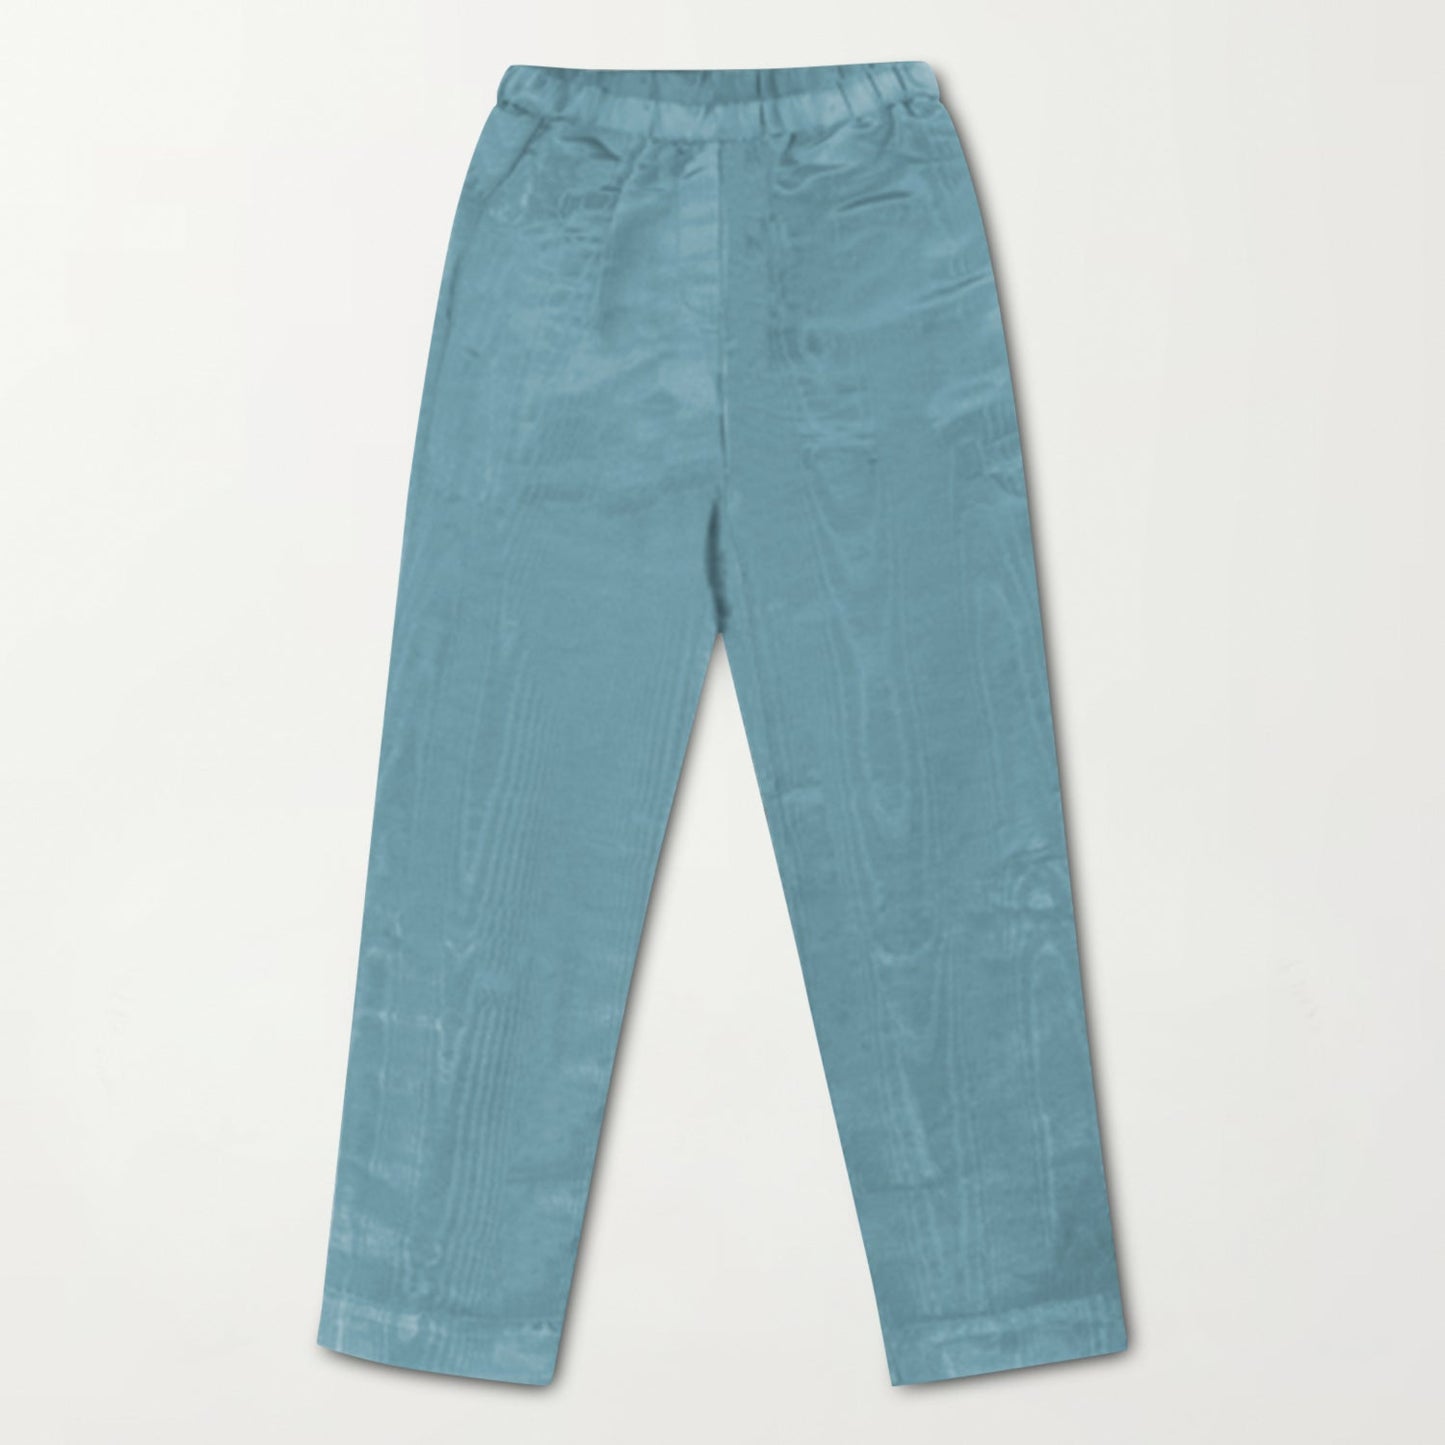 The Moire Jet Set Pant in Cerulean